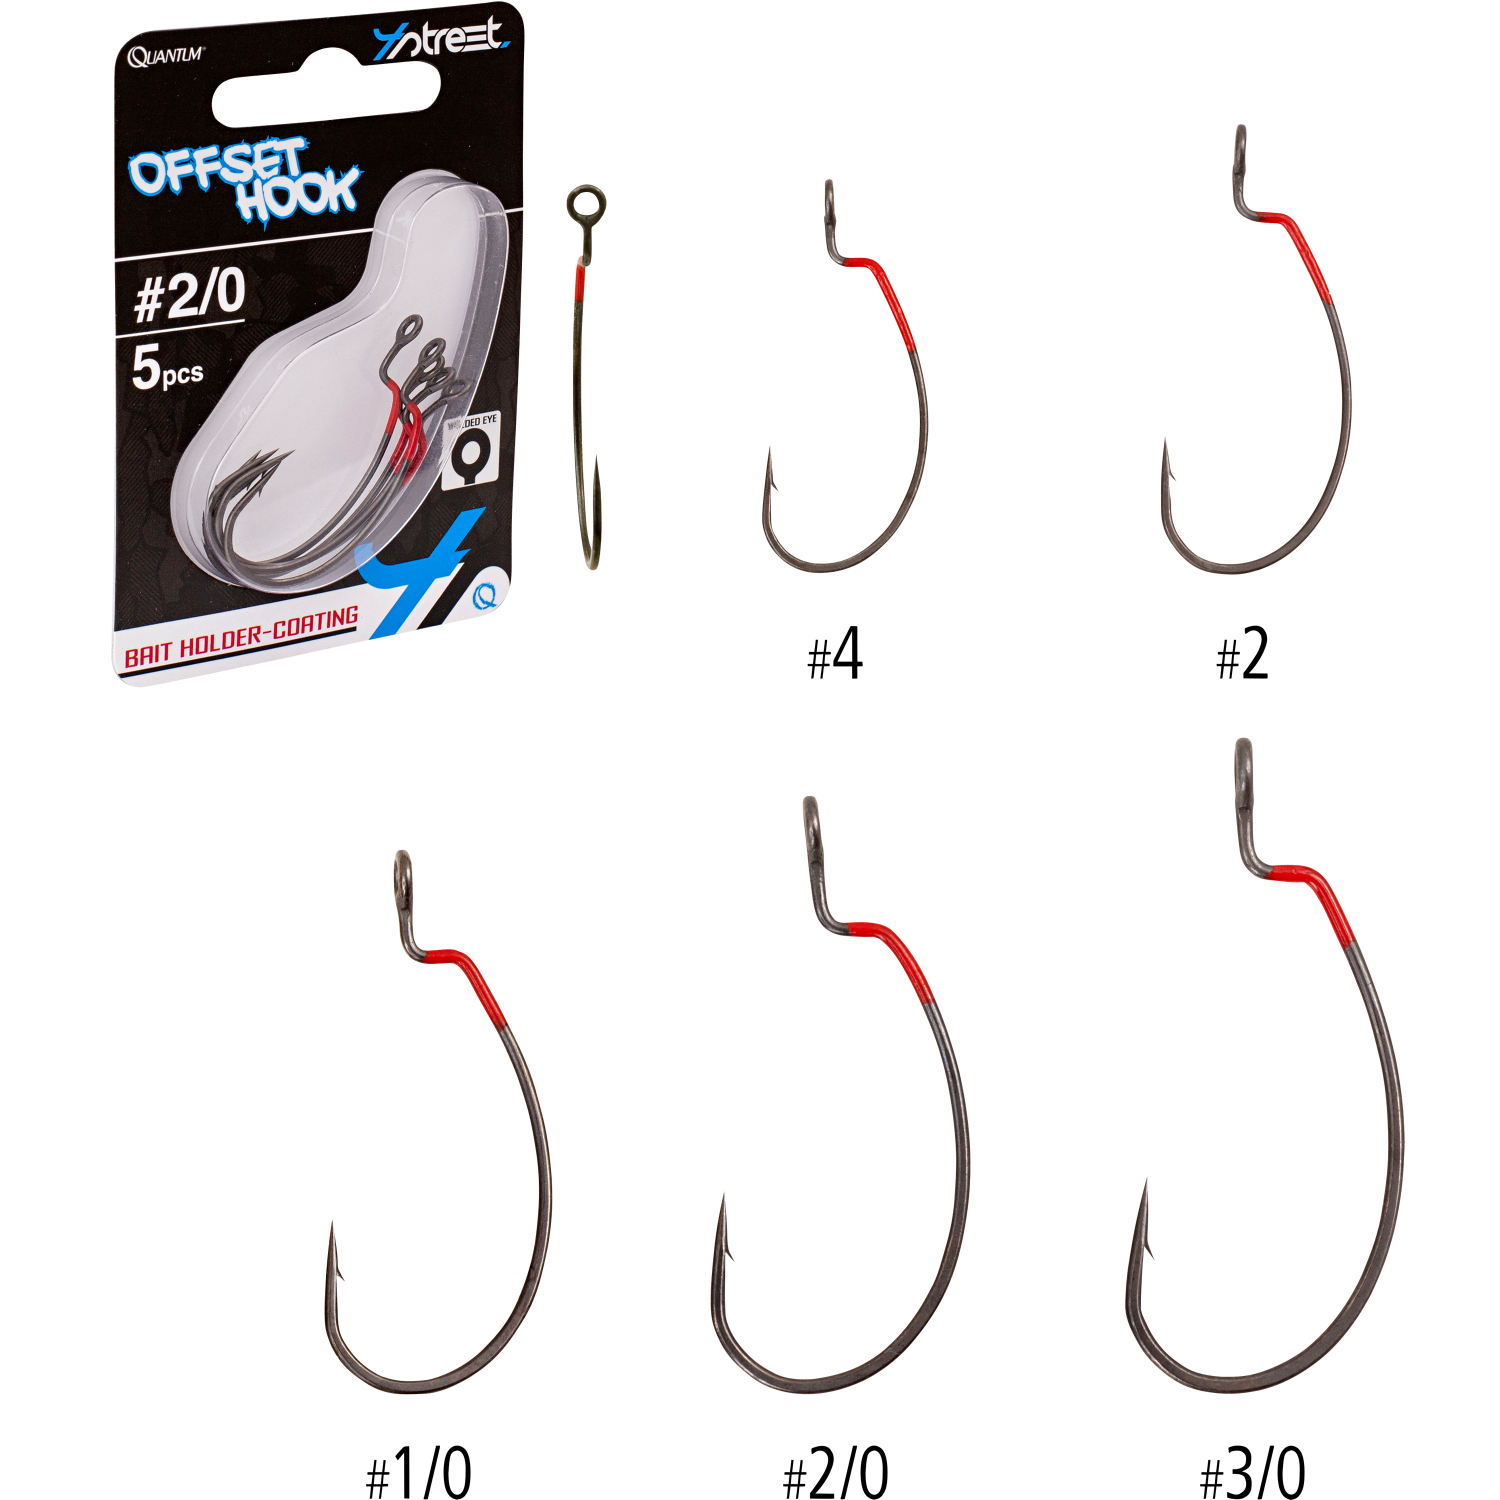 4Street Offset Hook at low prices